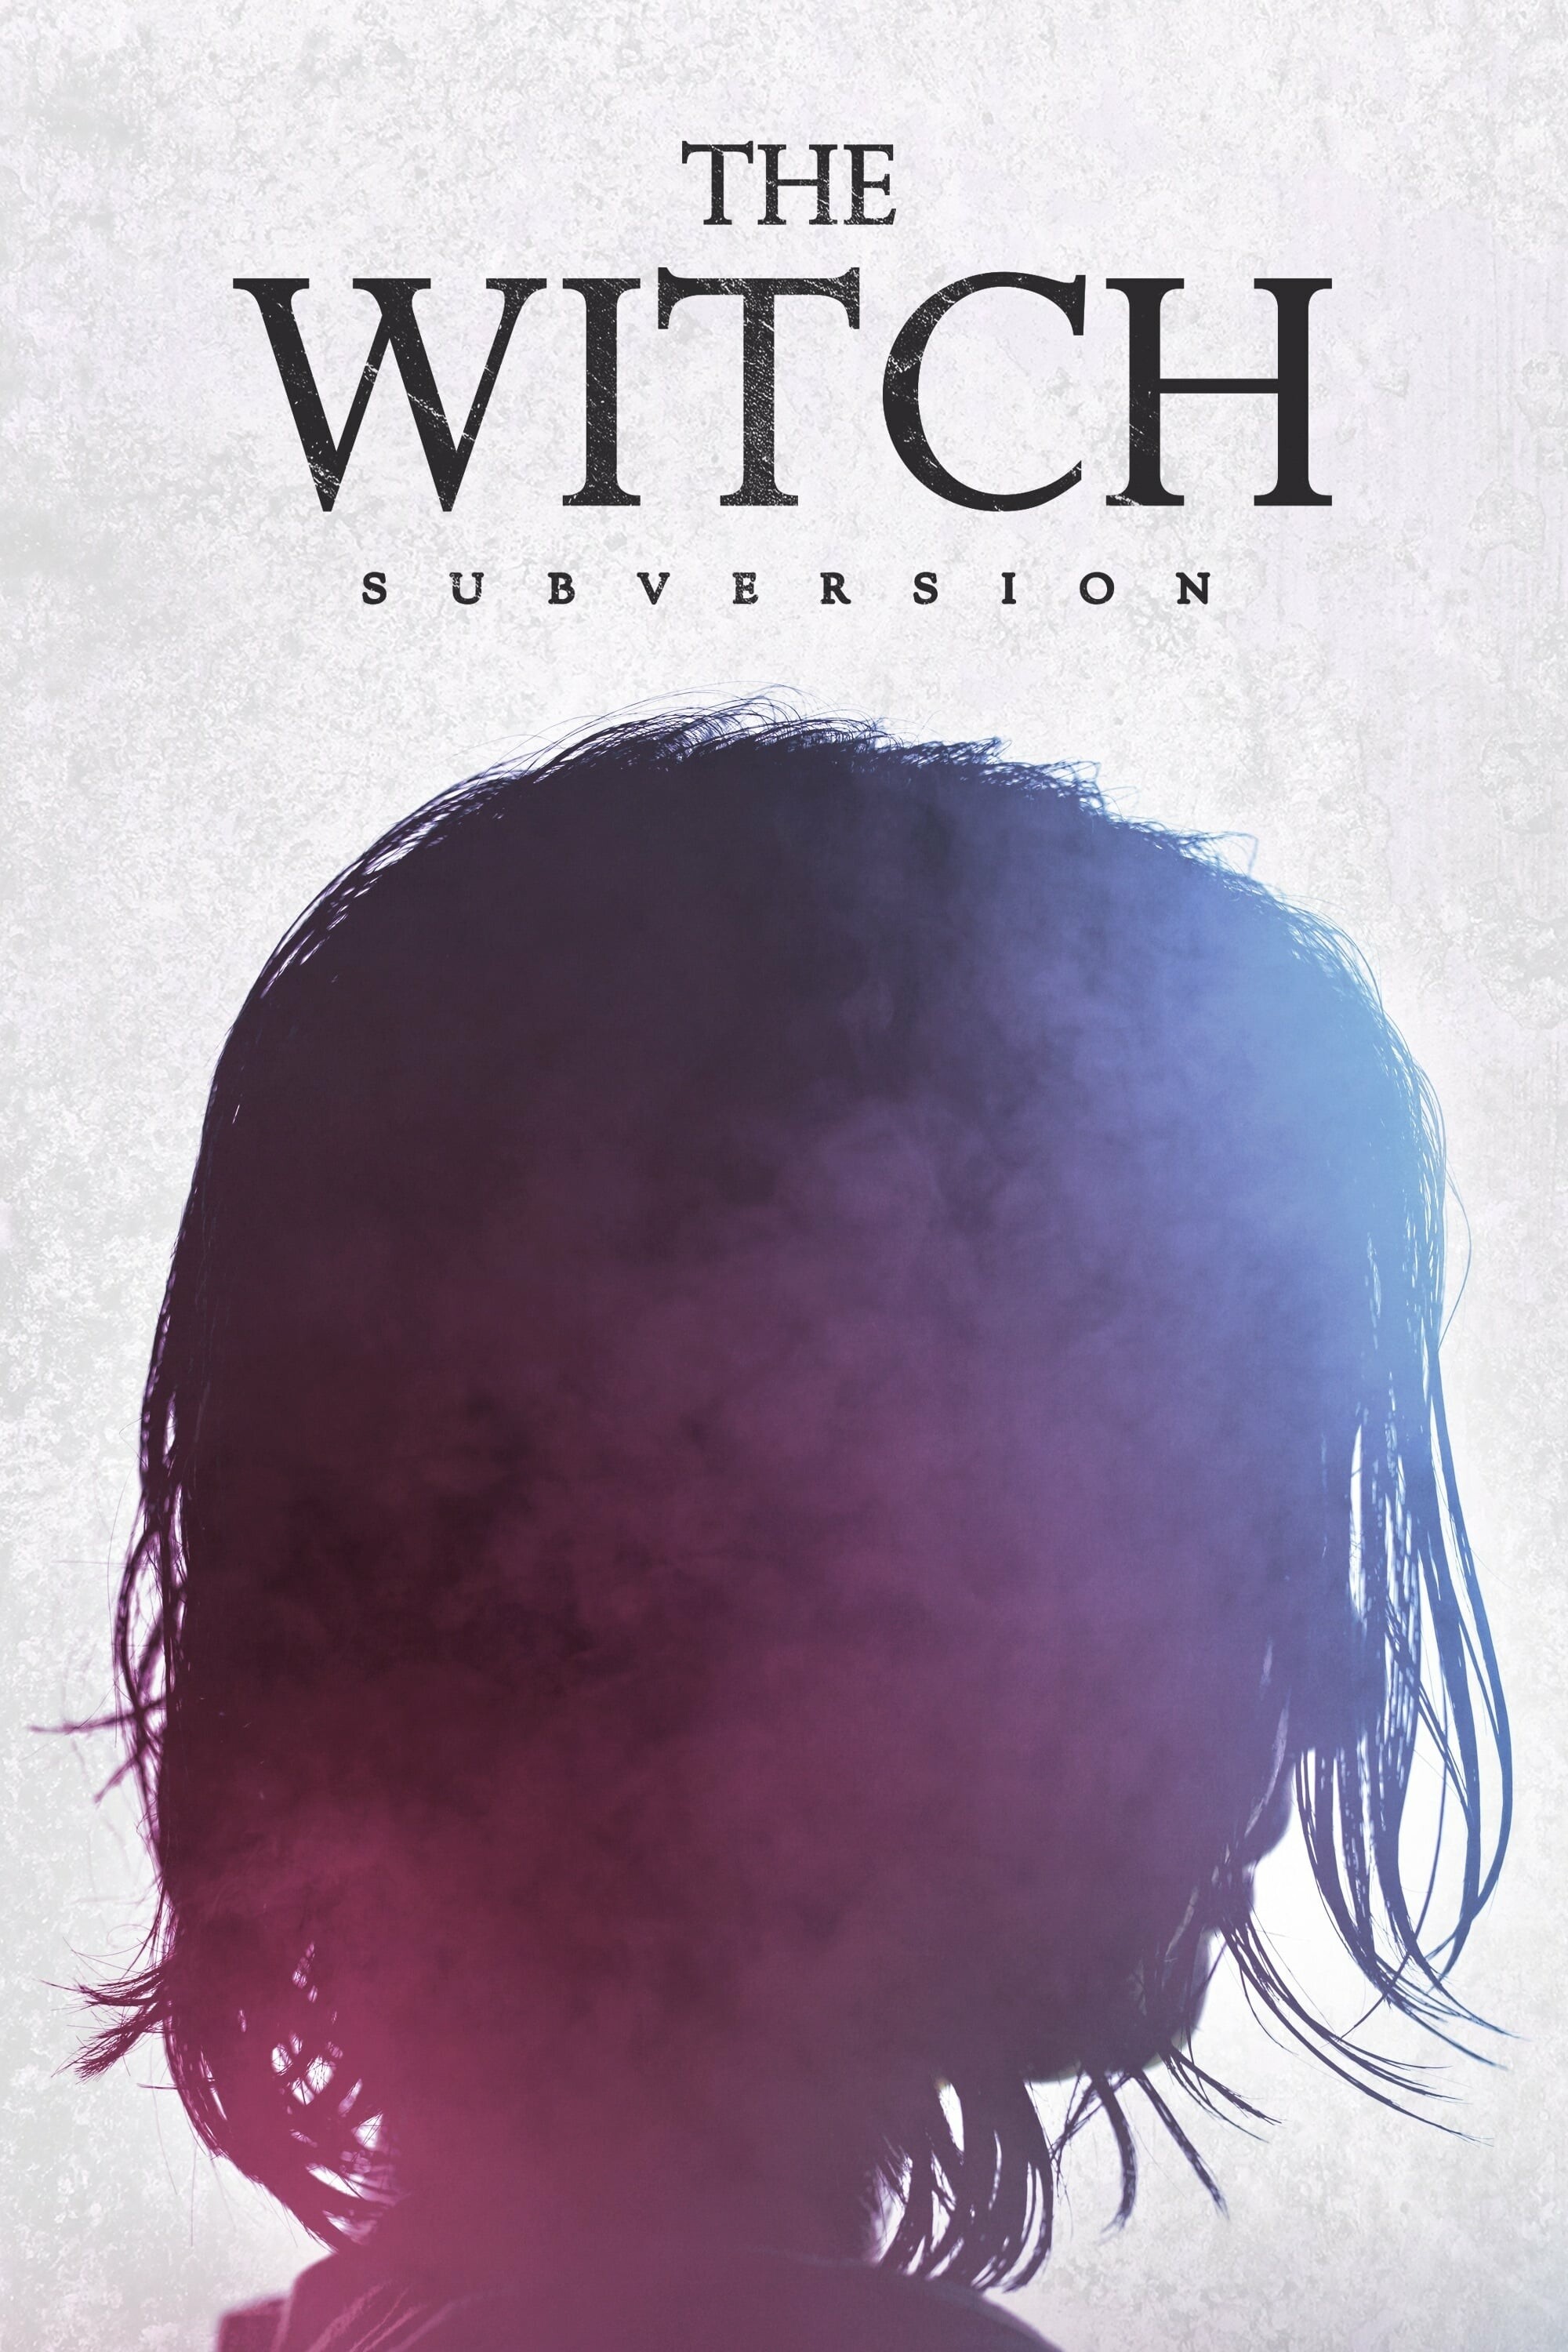 The Witch Part 1 The Subversion 2018 1080p BluRay x264-GiMCHi